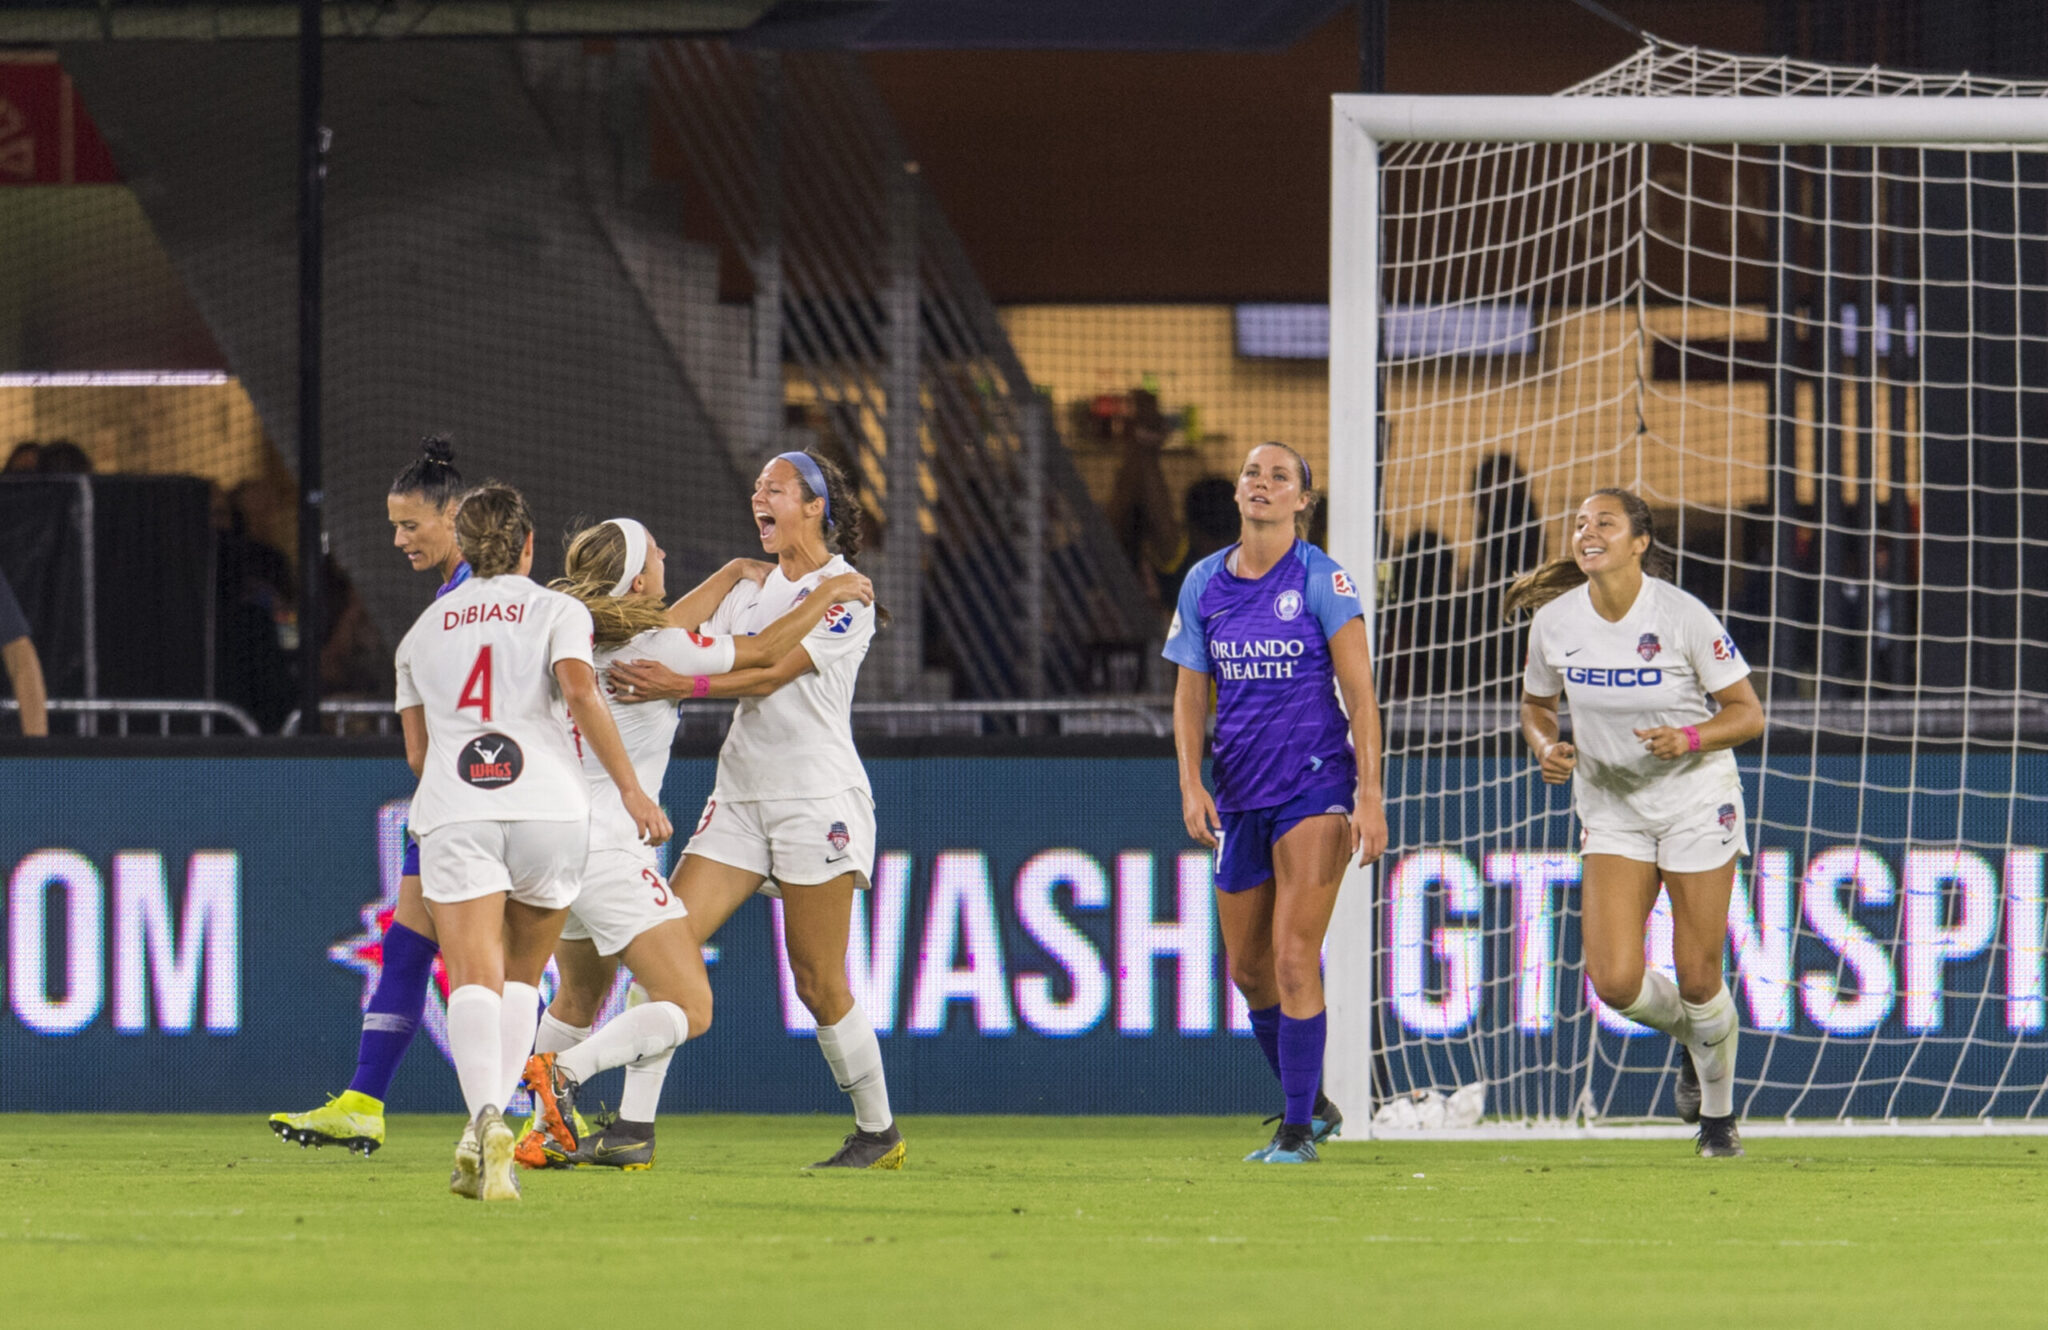 Ashley Hatch nominated for Week 19 Goal of the Week award Featured Image